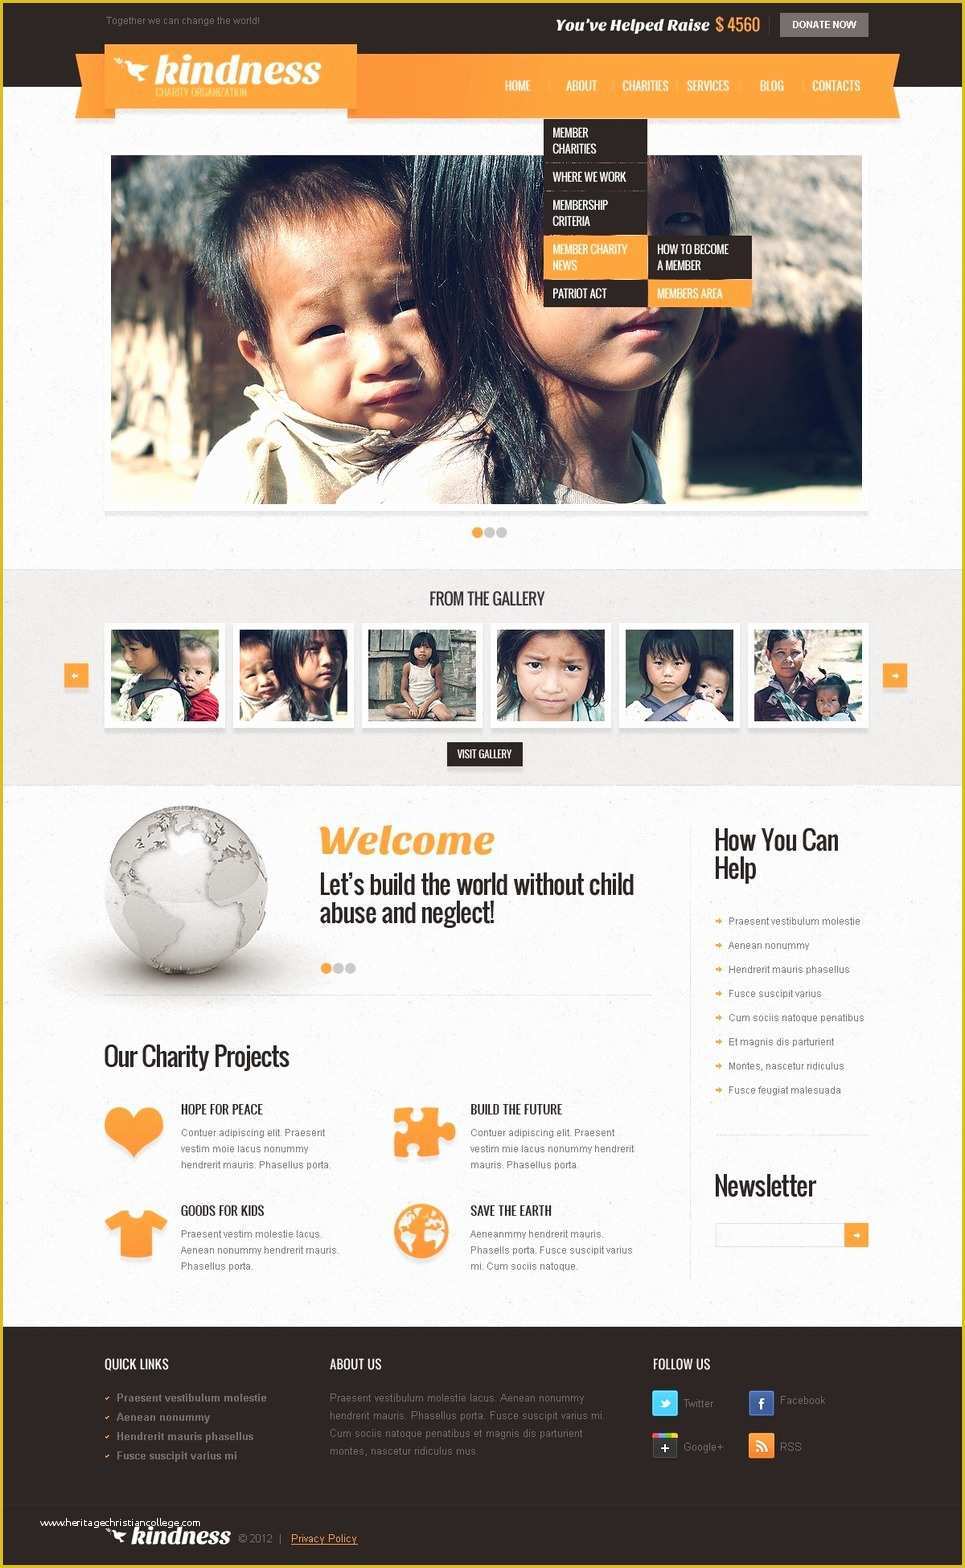 Orphanage Website Templates Free Download Of World Class Wordpress Charity organization themes